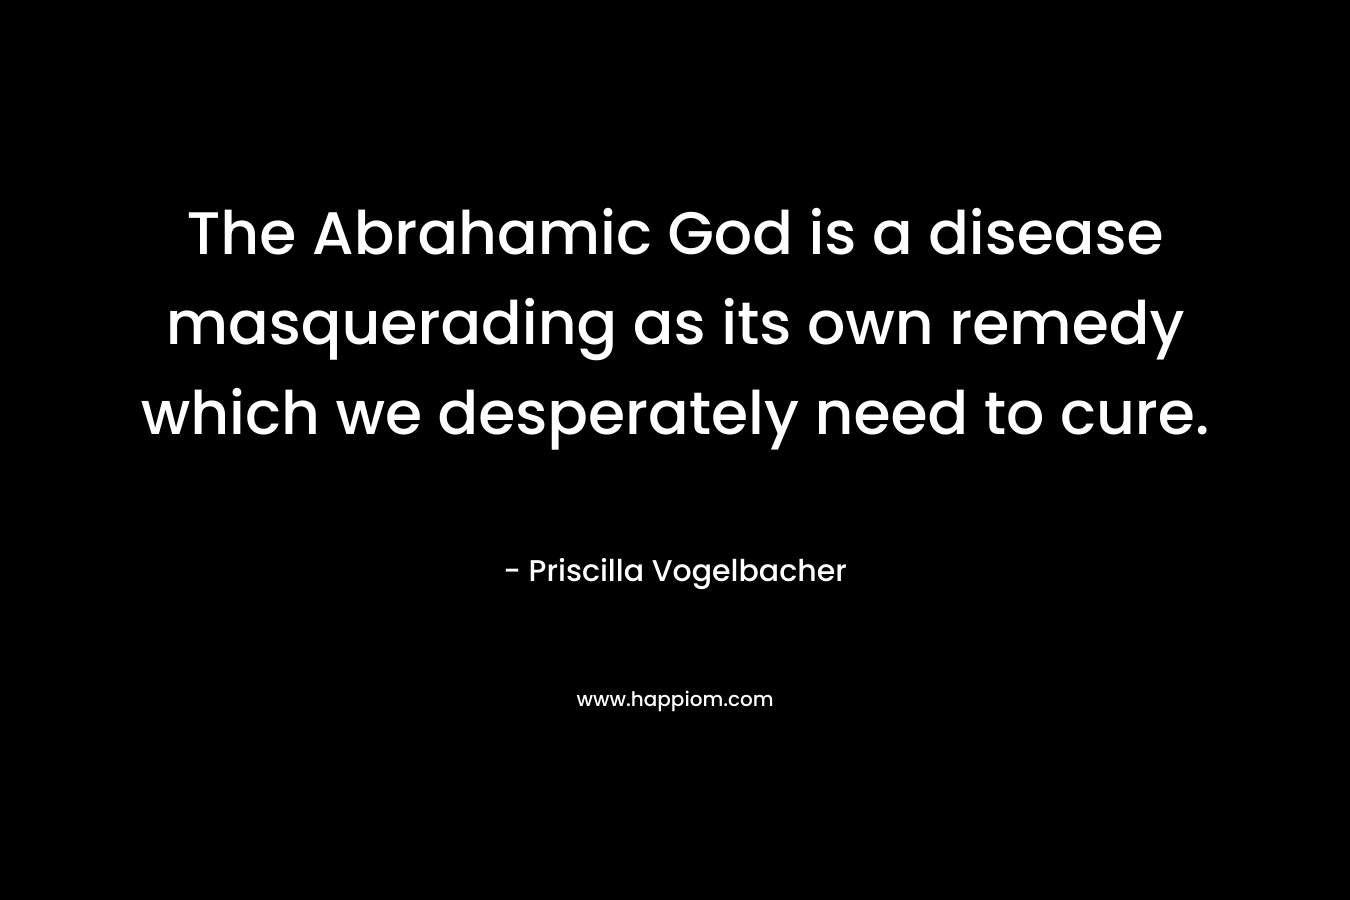 The Abrahamic God is a disease masquerading as its own remedy which we desperately need to cure. – Priscilla Vogelbacher